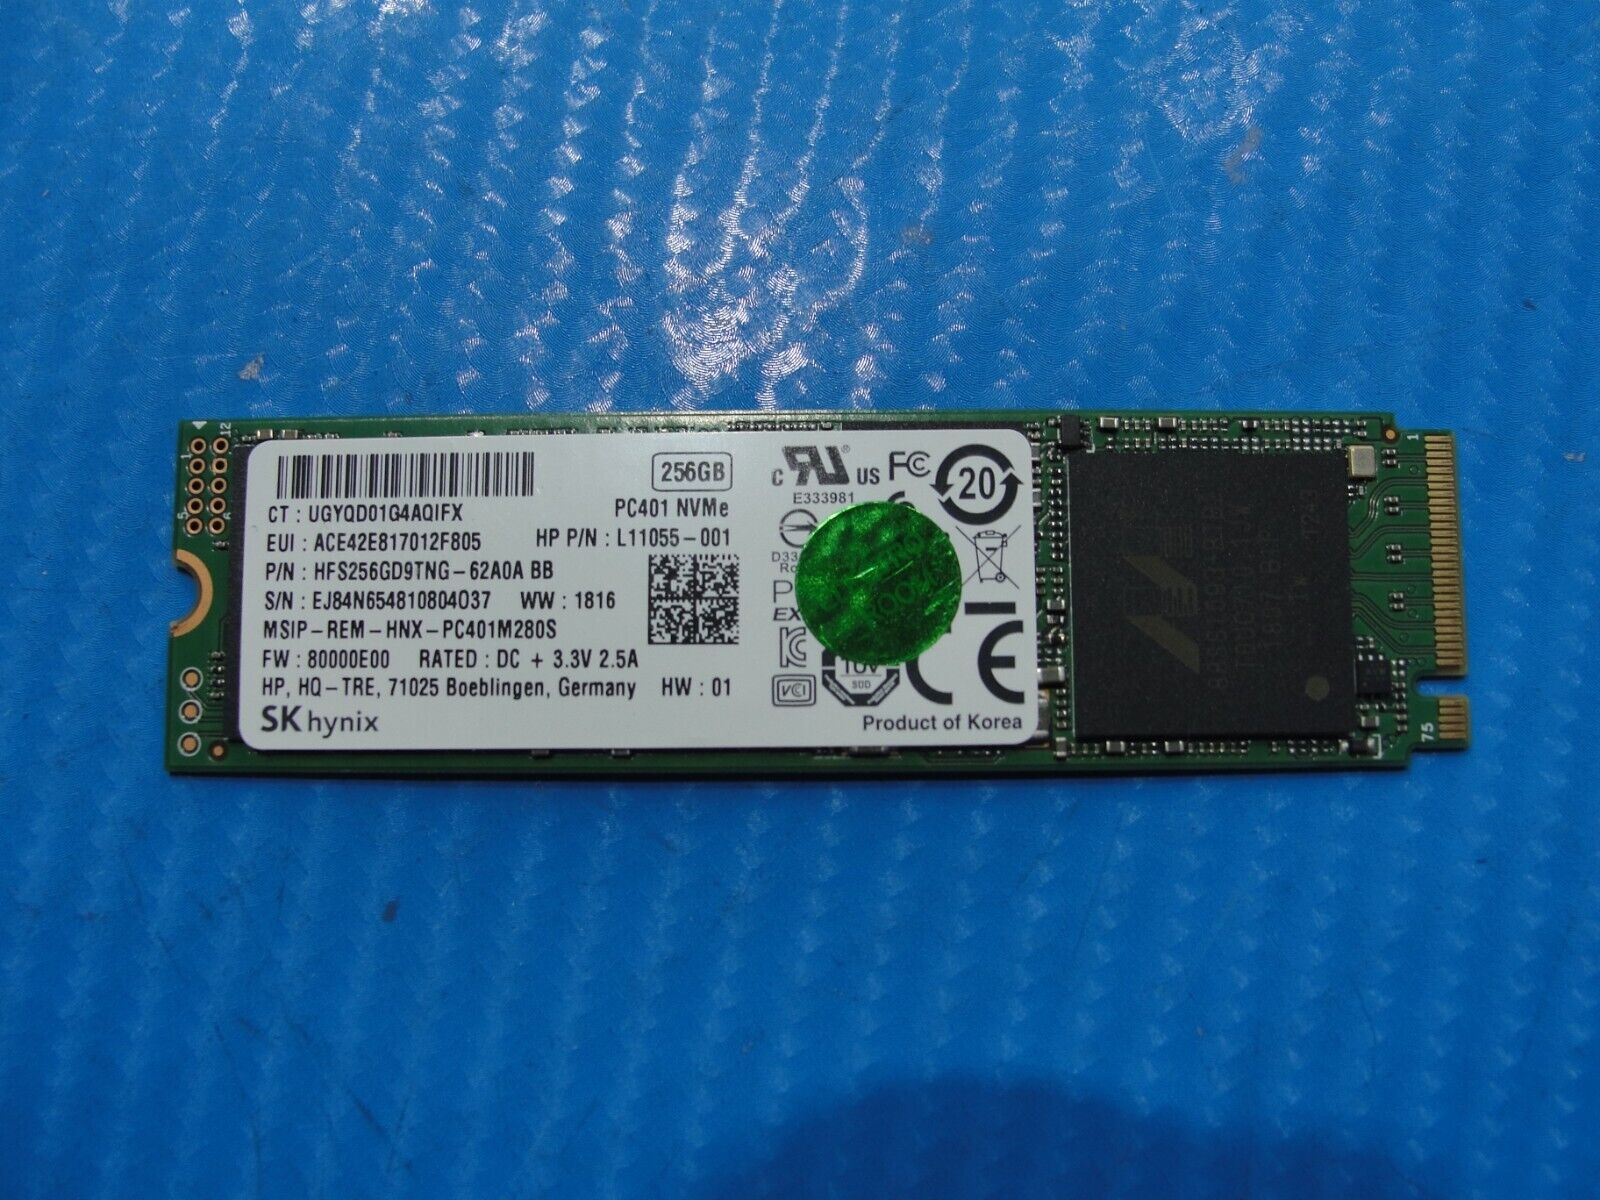 HP 450 G5 SK Hynix 256GB NVMe M.2 SSD Solid State Drive HFS256GD9TNG-62A0A